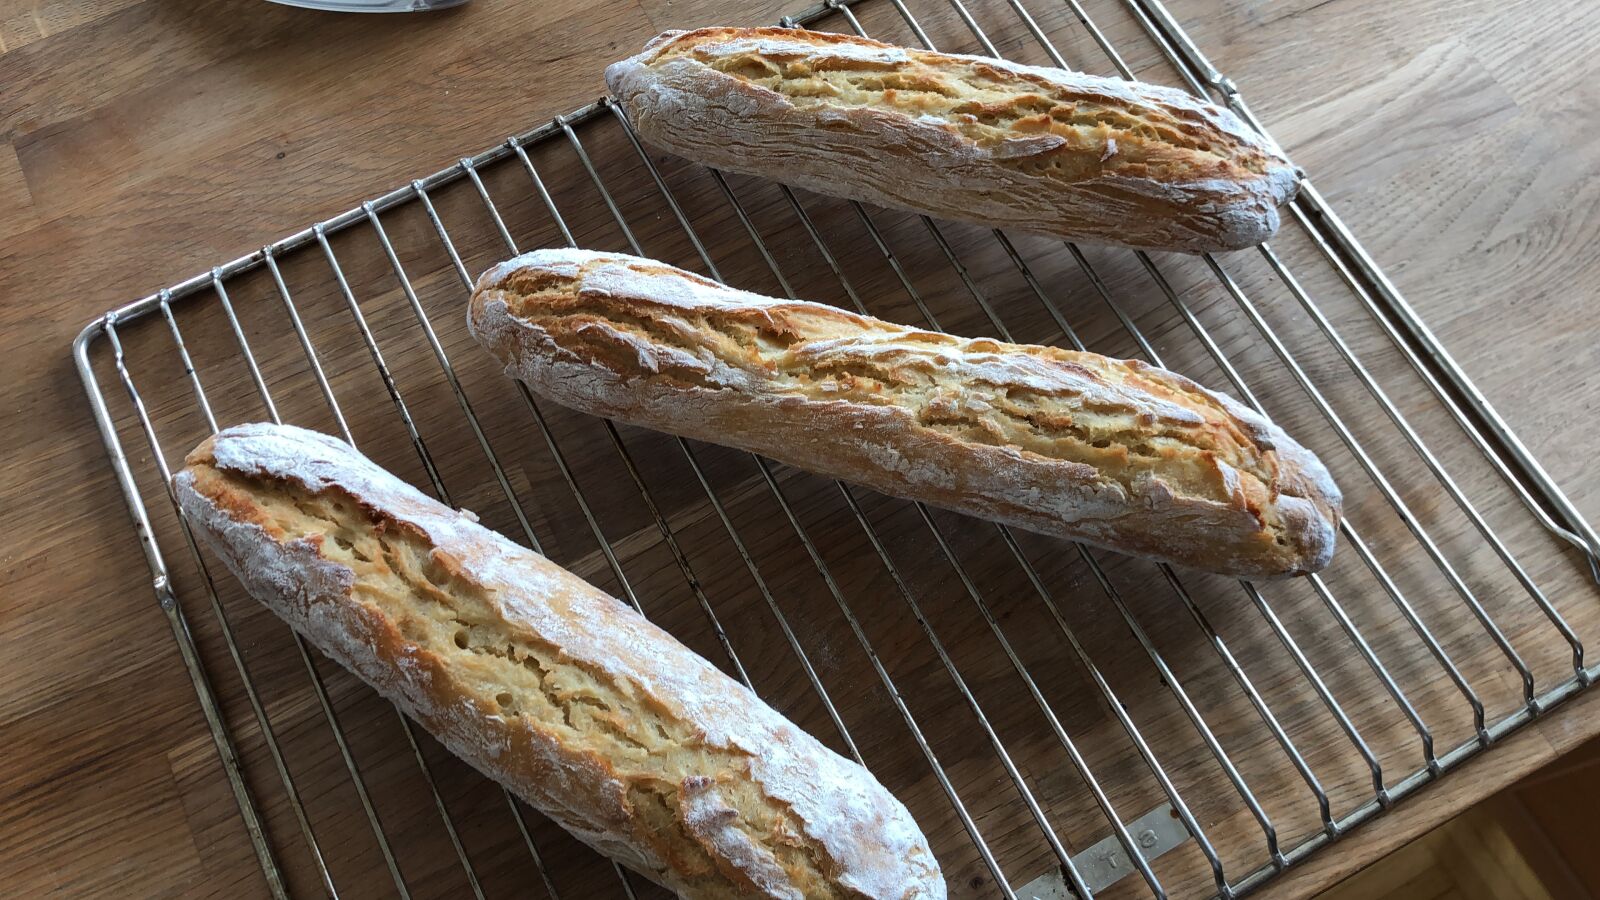 Apple iPhone X + iPhone X back camera 4mm f/1.8 sample photo. Baguette, bake, baked goods photography